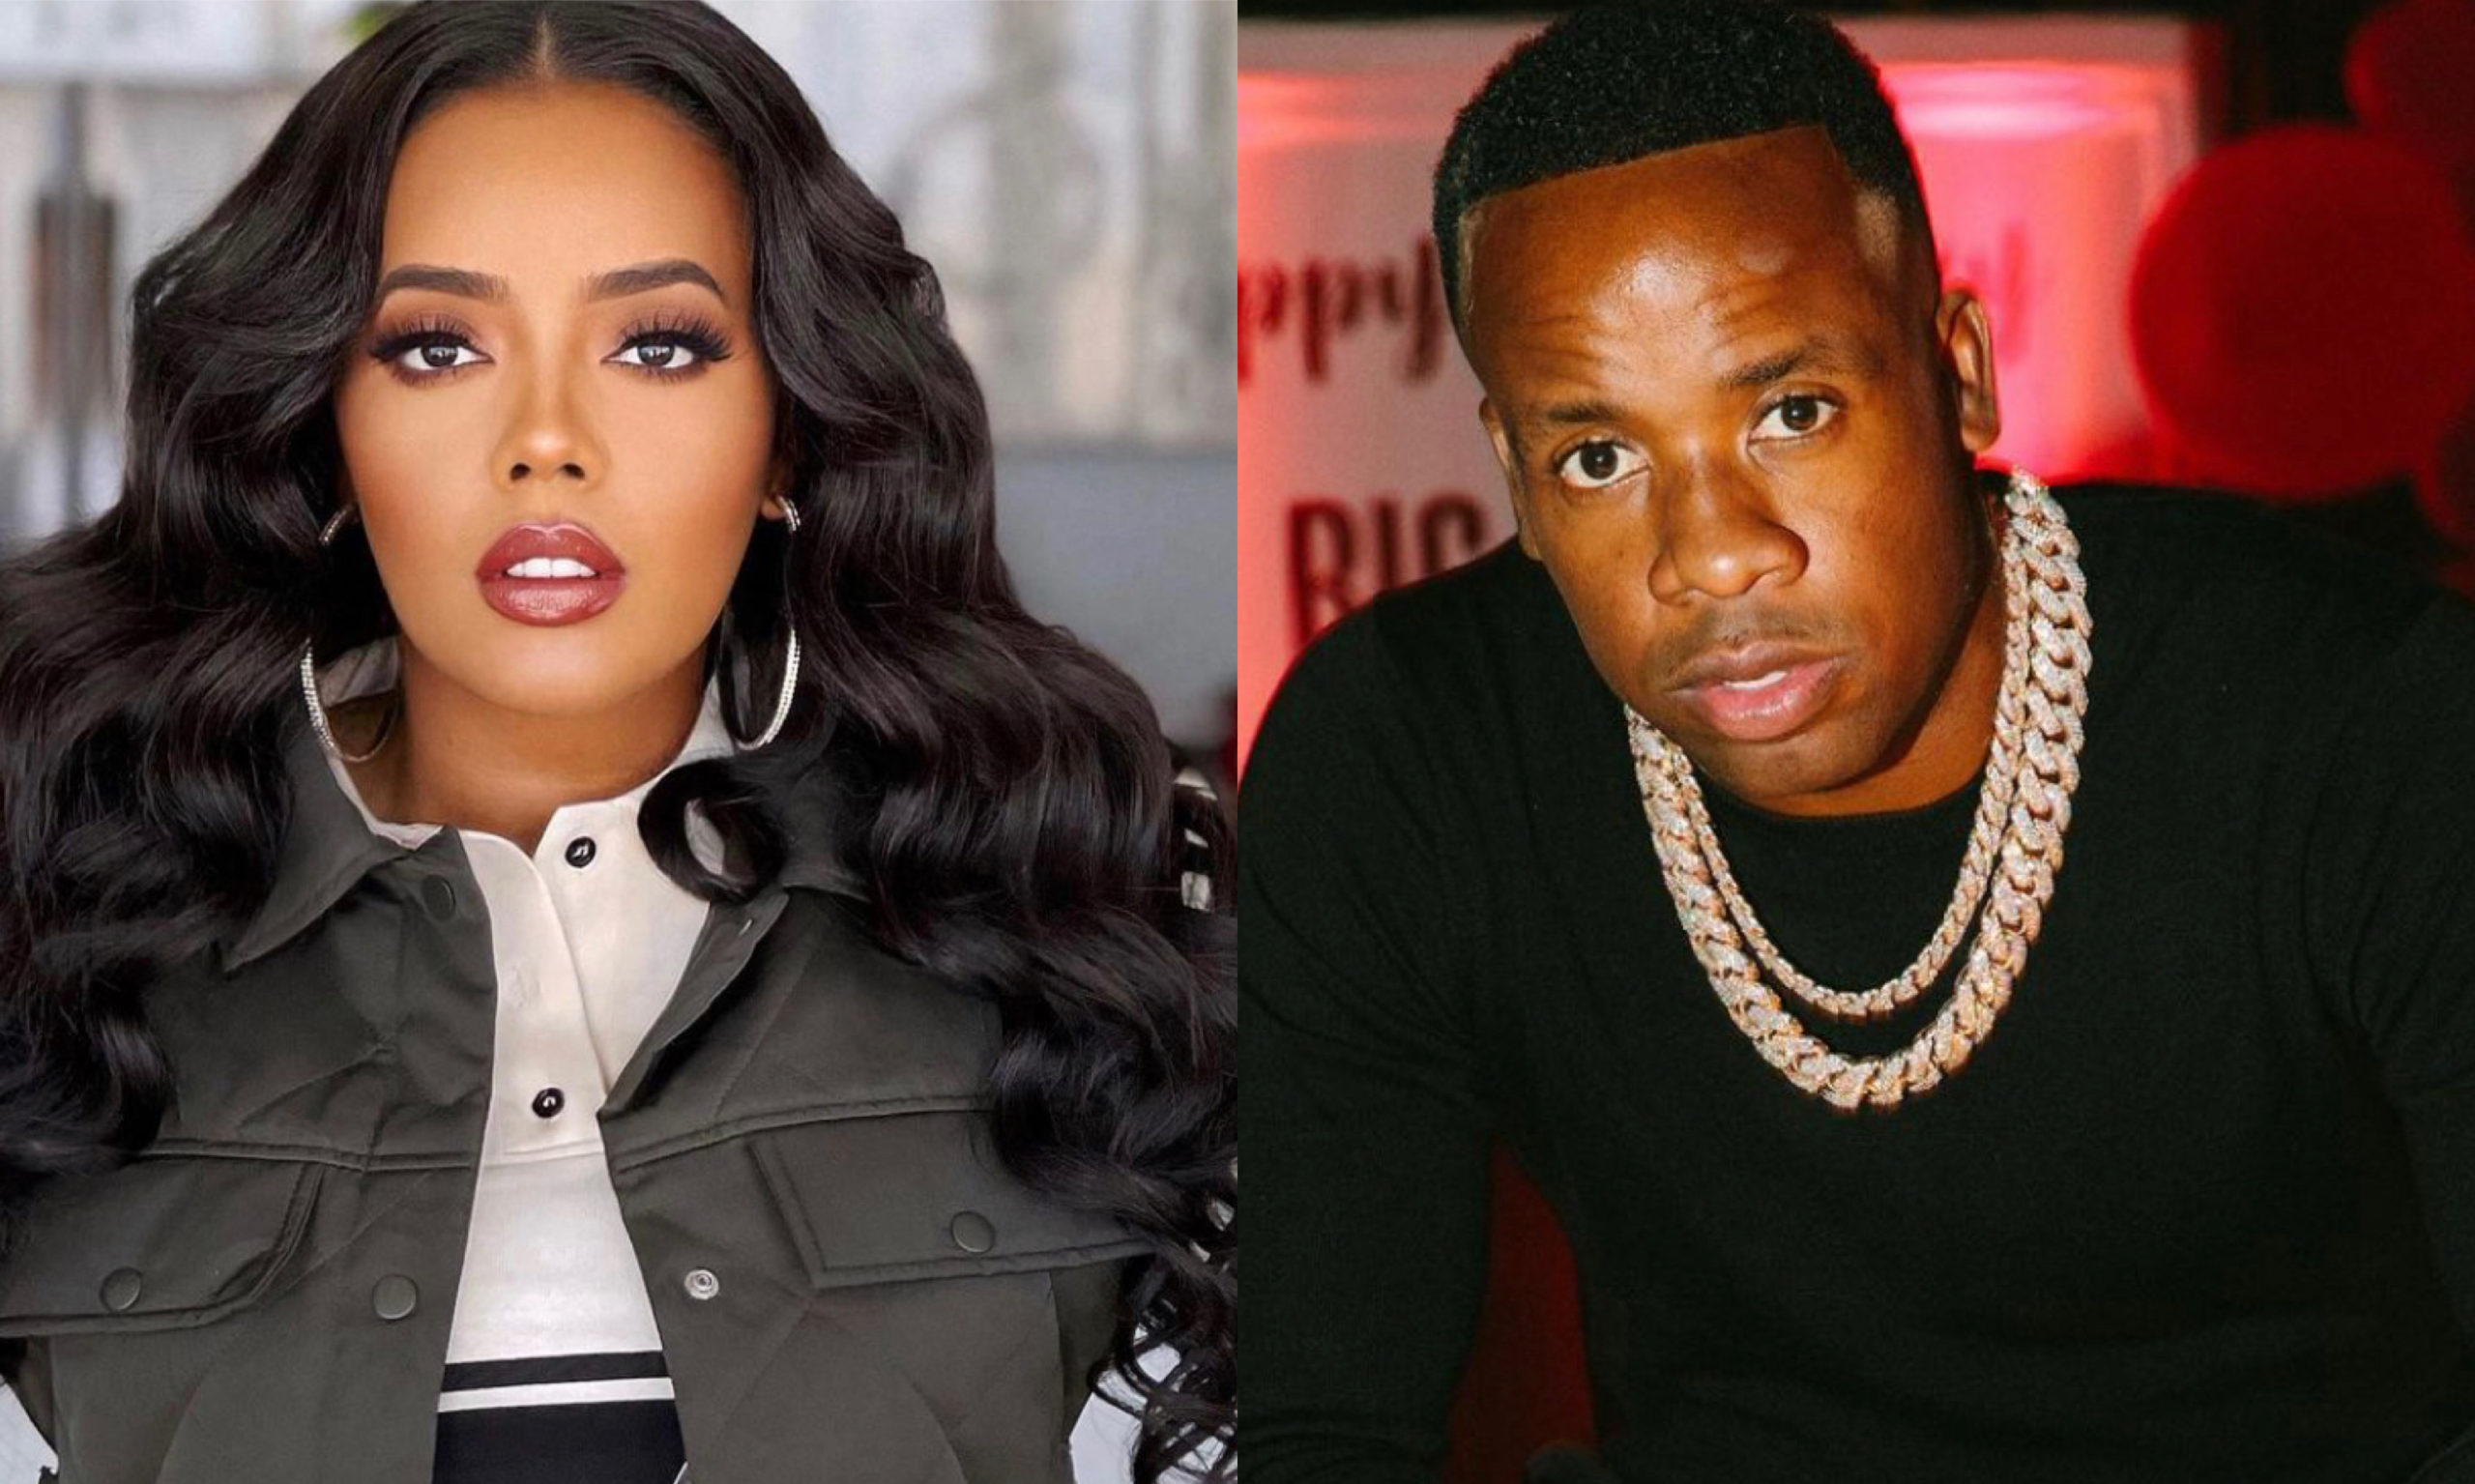 Angela Simmons and Yo Gotti Recent Link Up Causes a Frenzy on Social Media, This Appearance Comes Years After the Rapper Expressed Interest in the Star